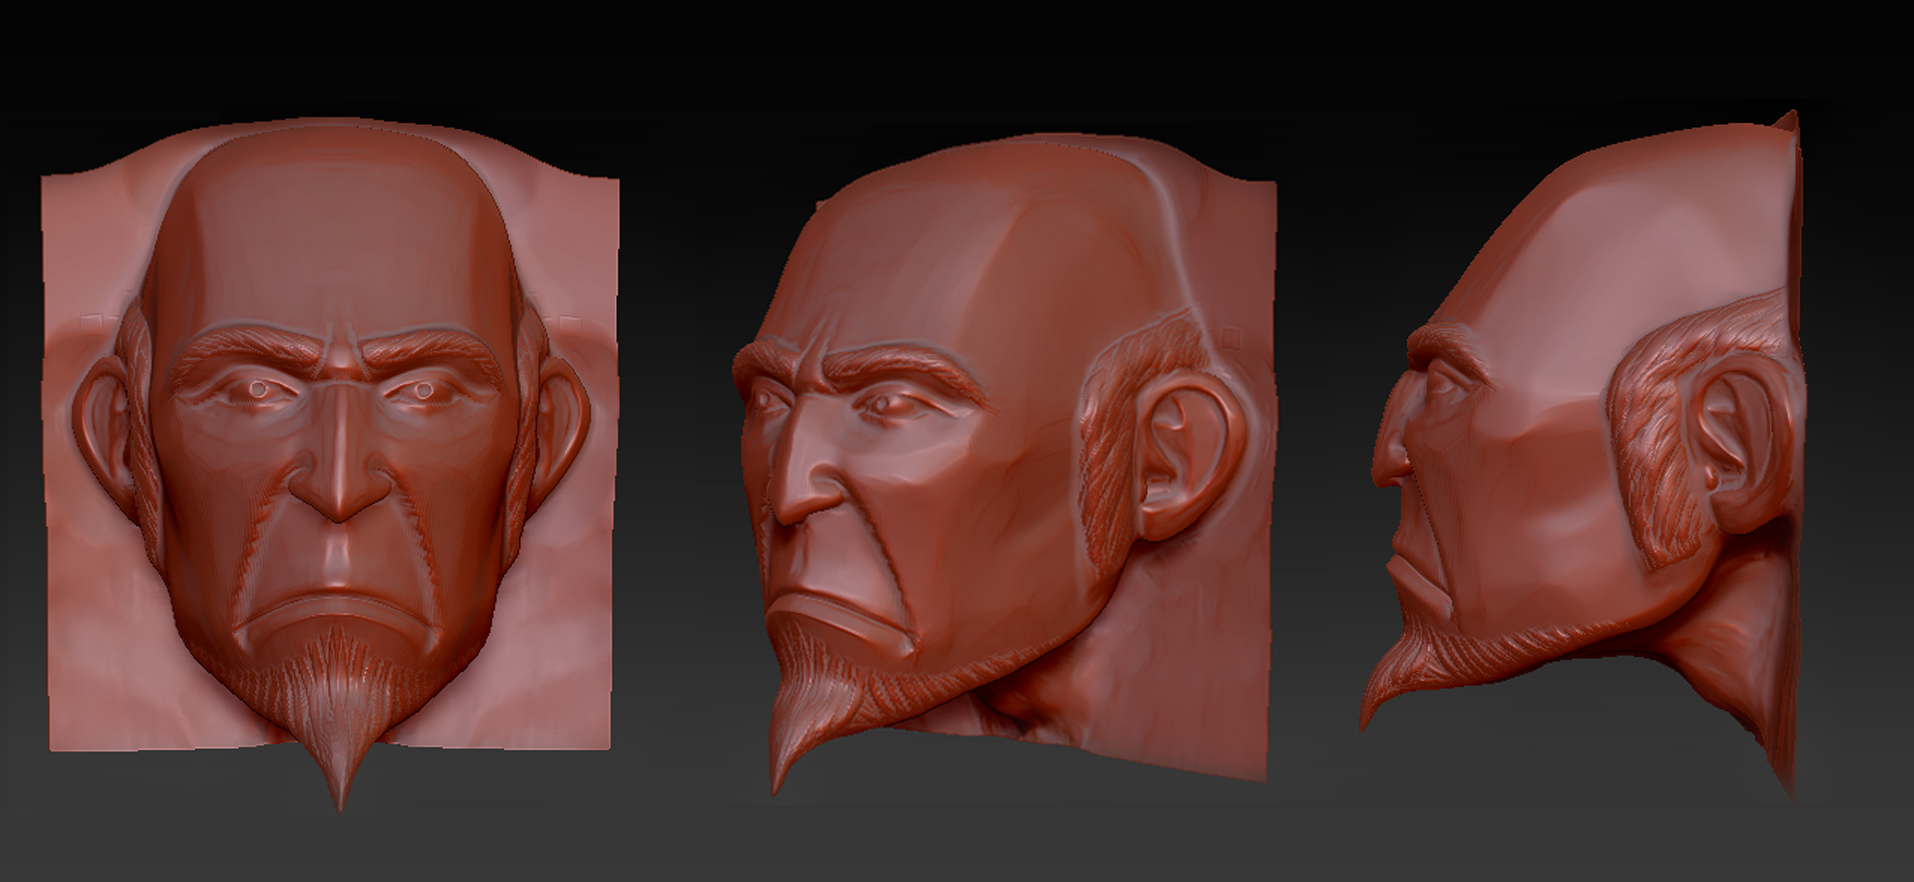 learning_zbrush___03_by_gingeradventures-d67xmdd.png